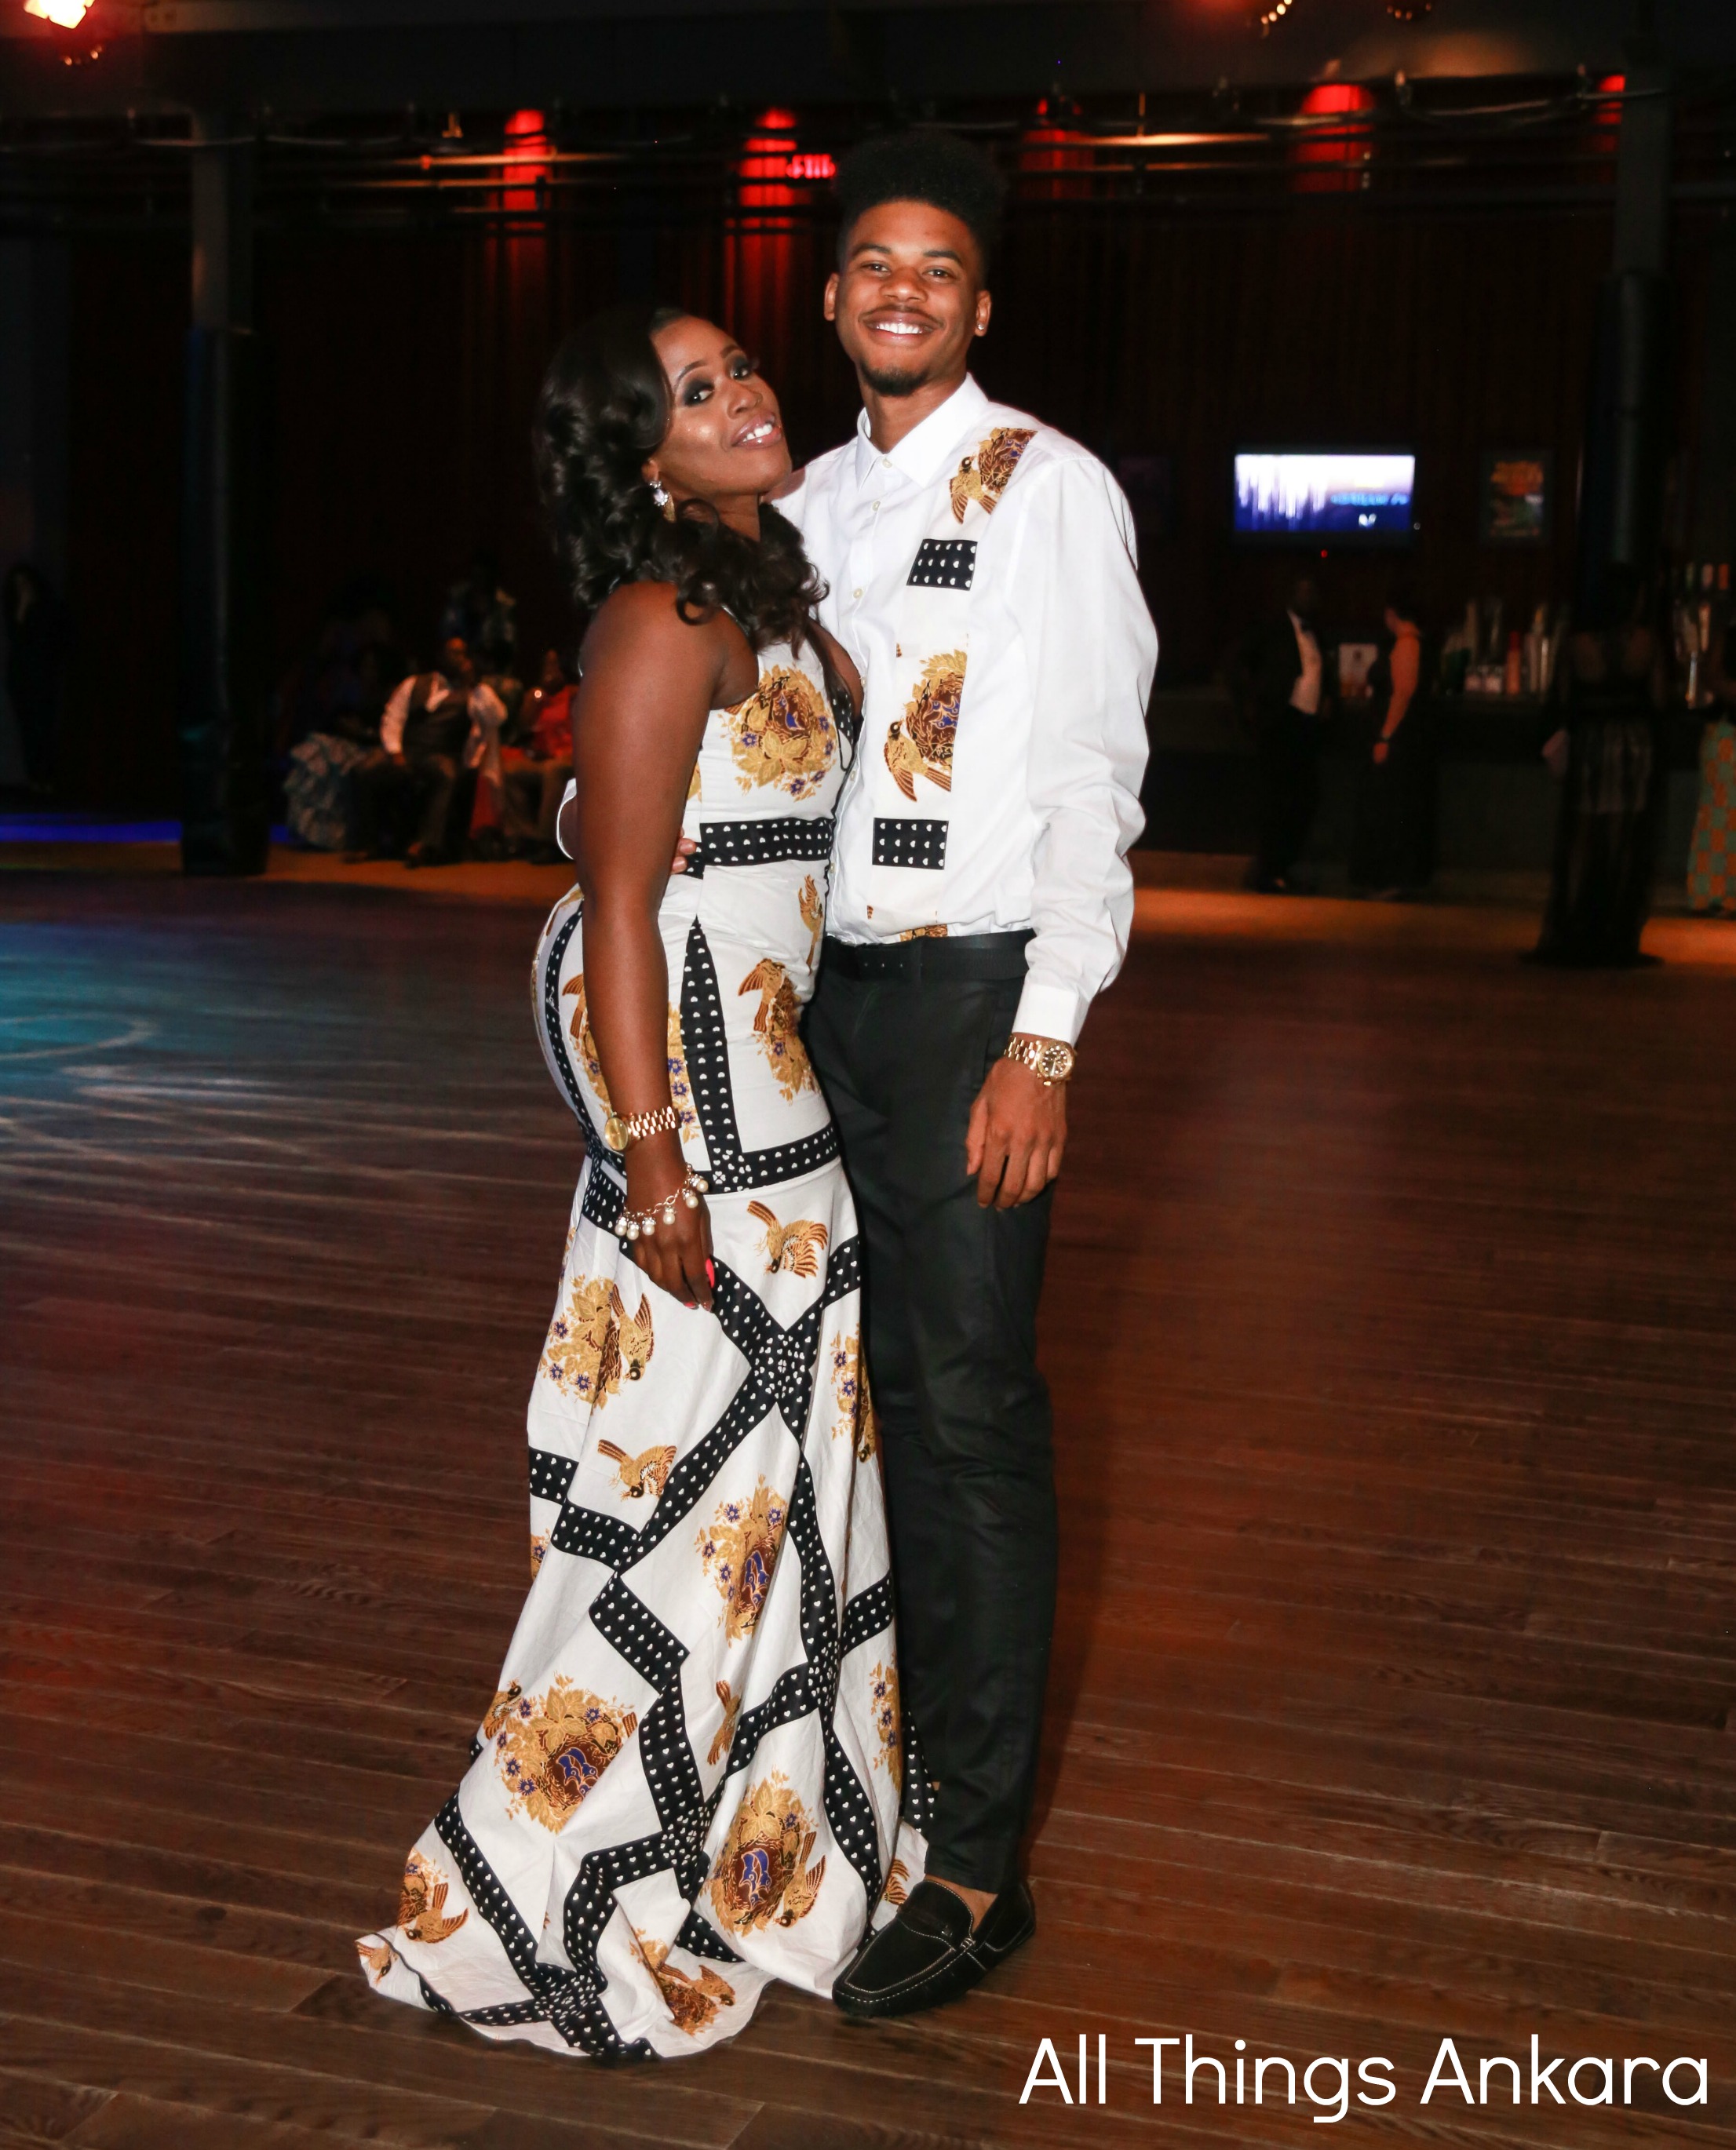 ball-gwb-commissions-best-dressed-couples-at-gwb-commissions-7th-annual-green-white-blue-ball-2016-1